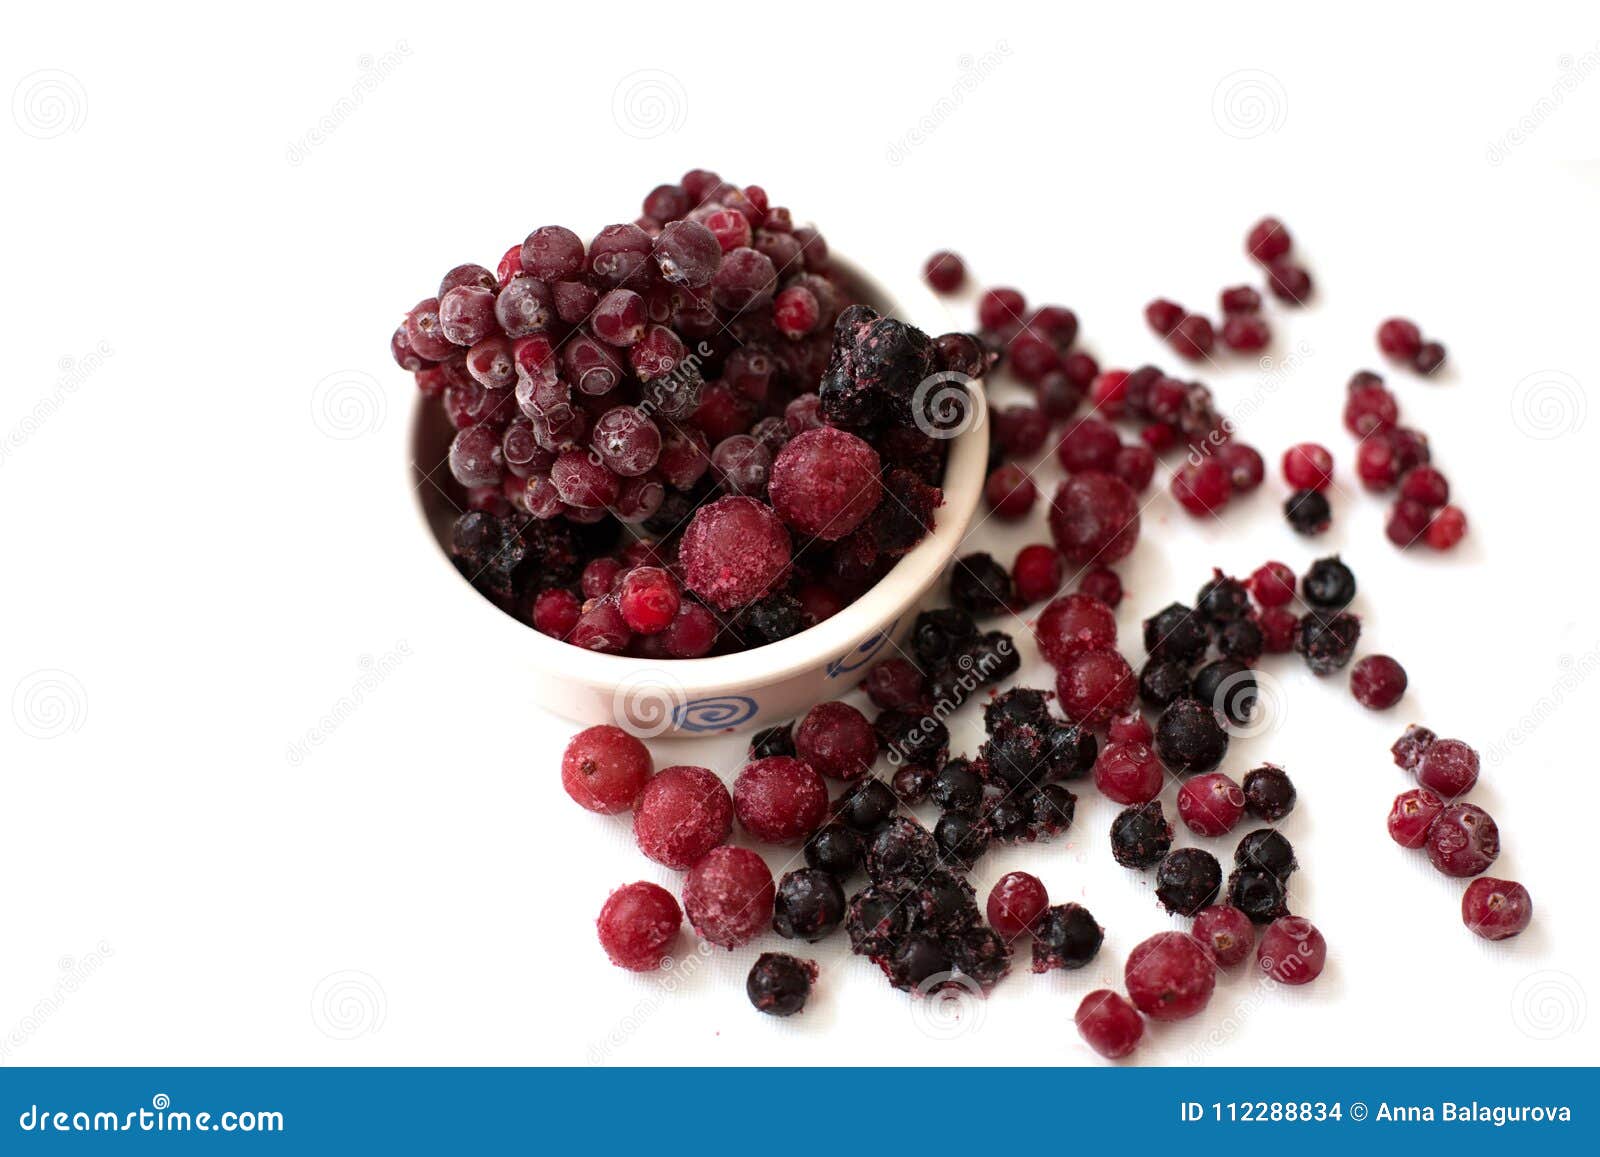 Bright Frozen Cherries, Cranberry, Blueberries are Full of Vitamins for ...